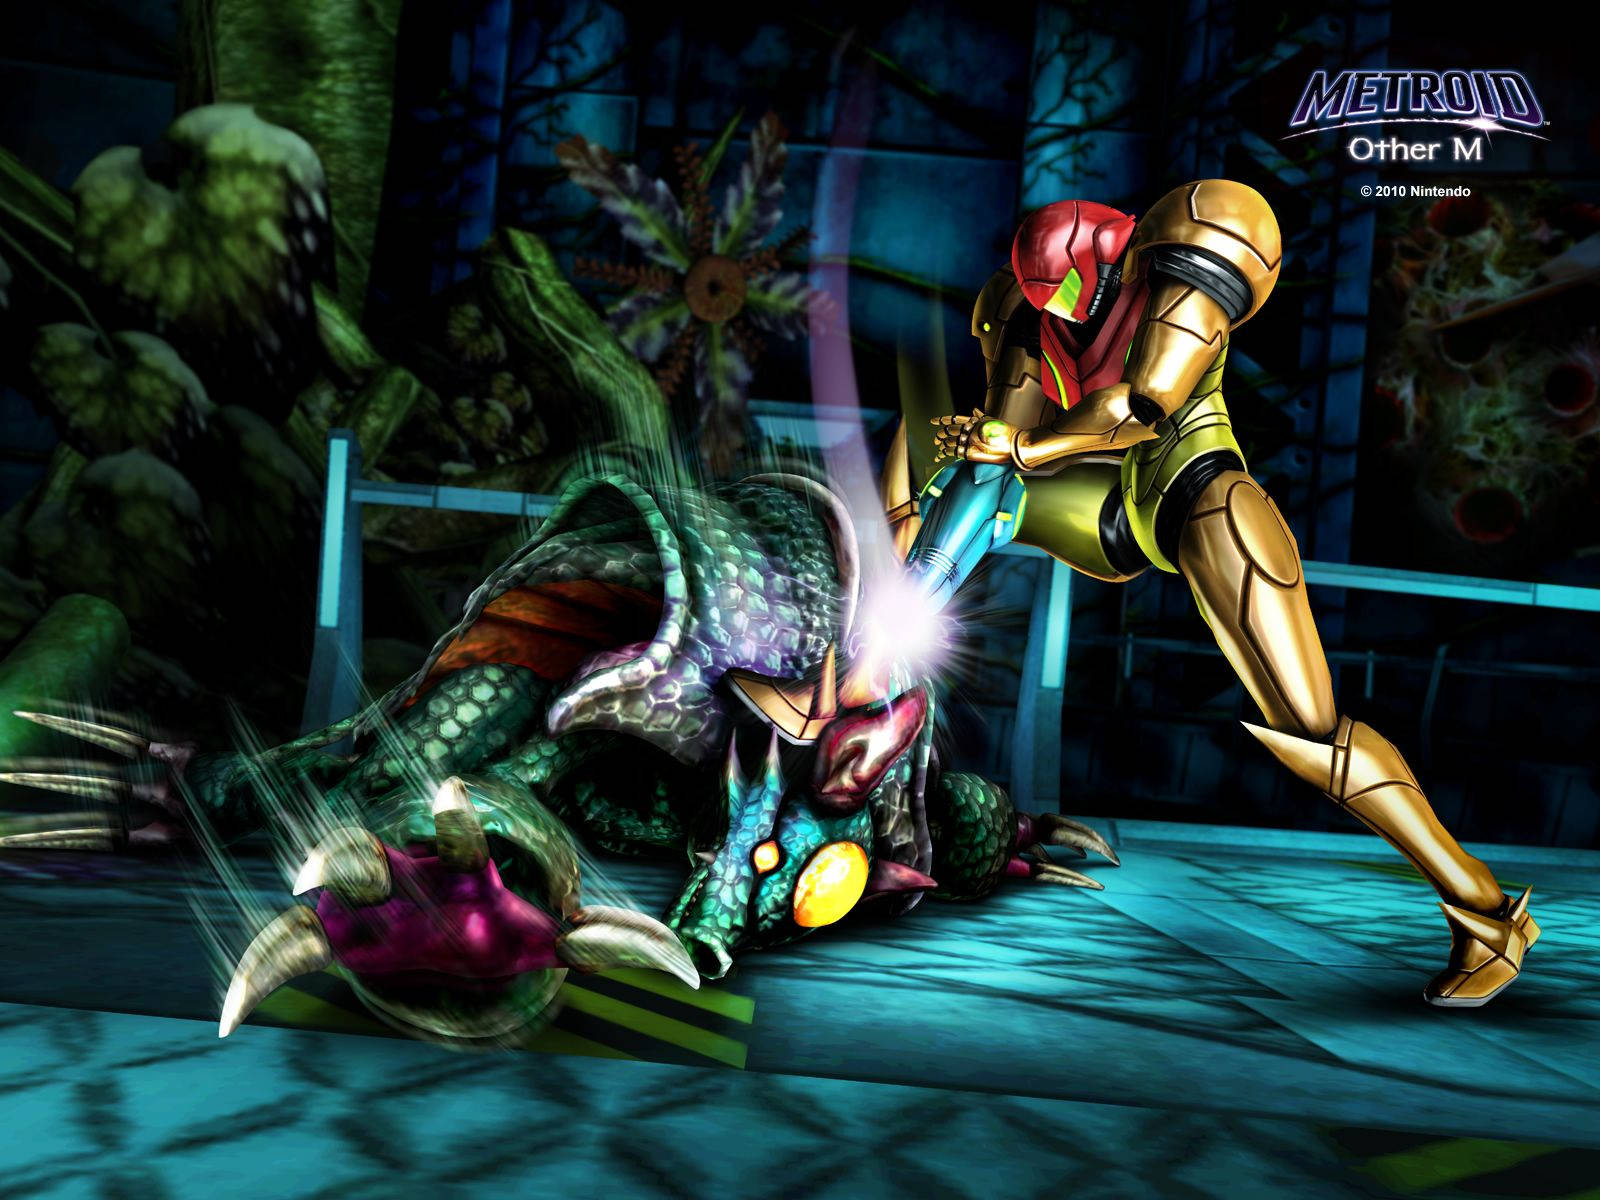 Metroid: Other M Background